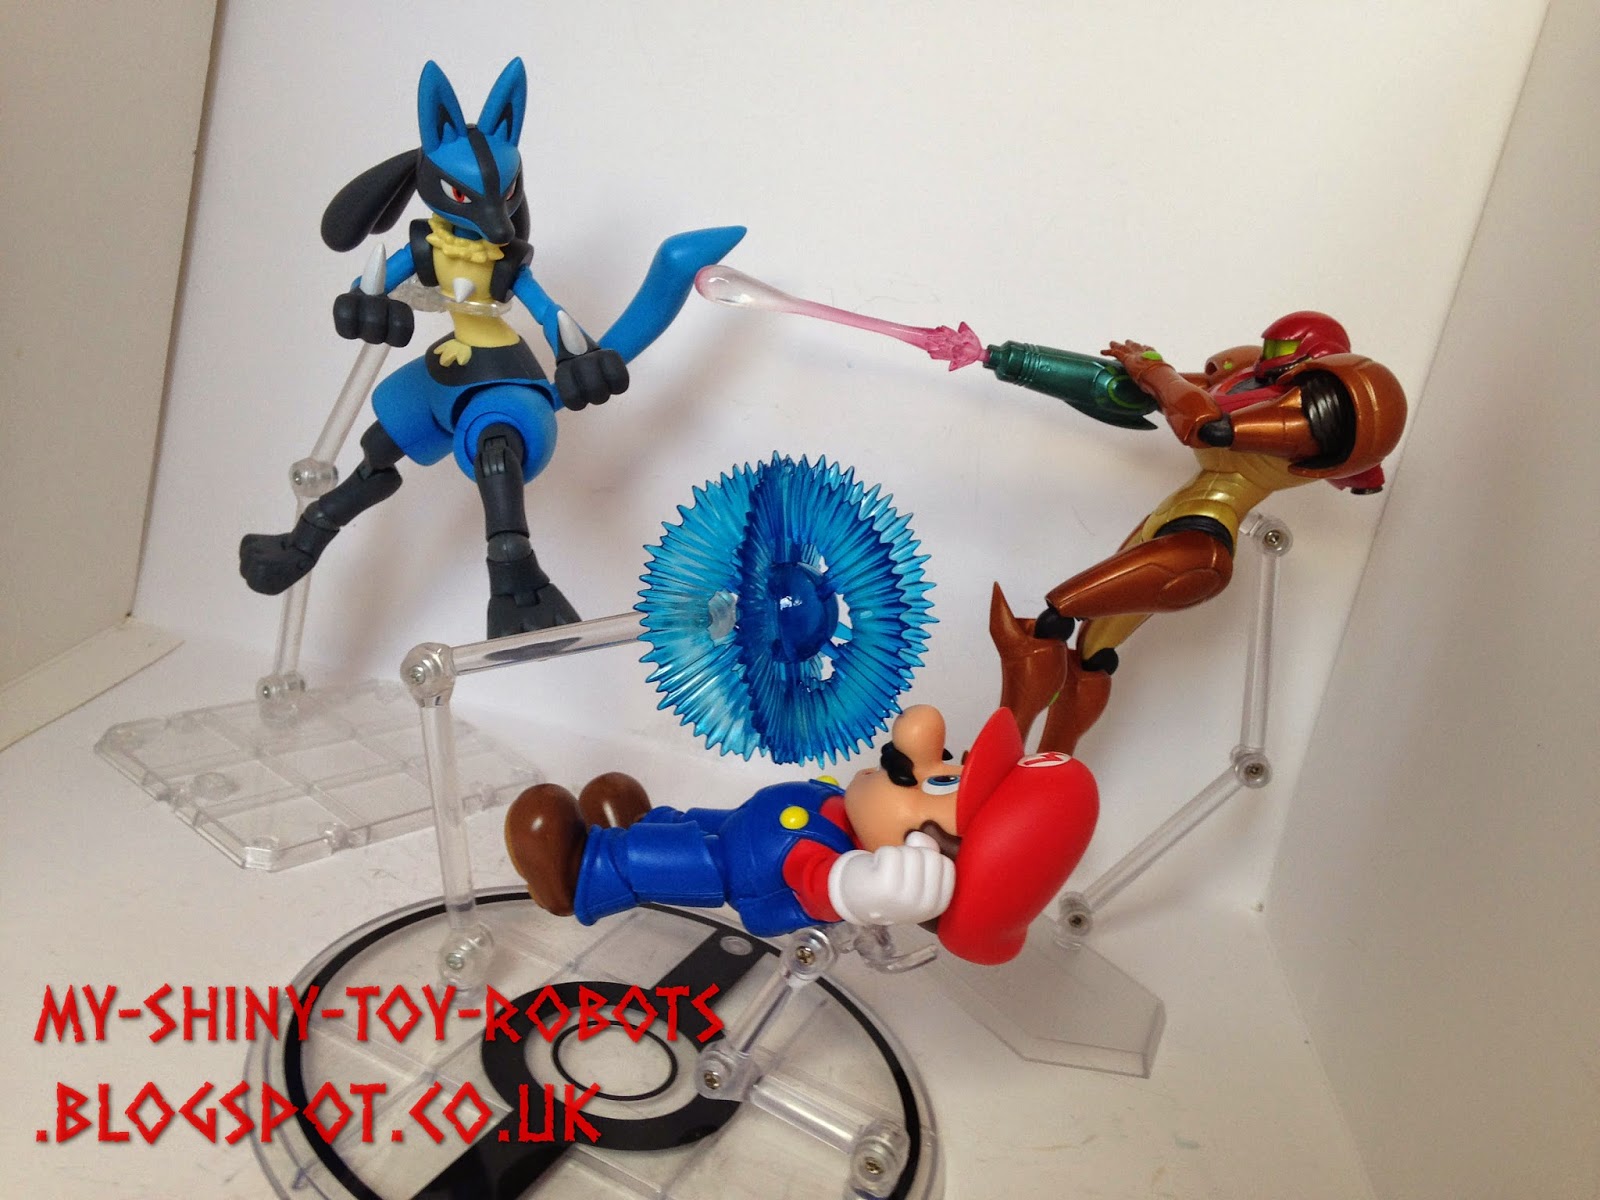 Lucario joins the brawl!